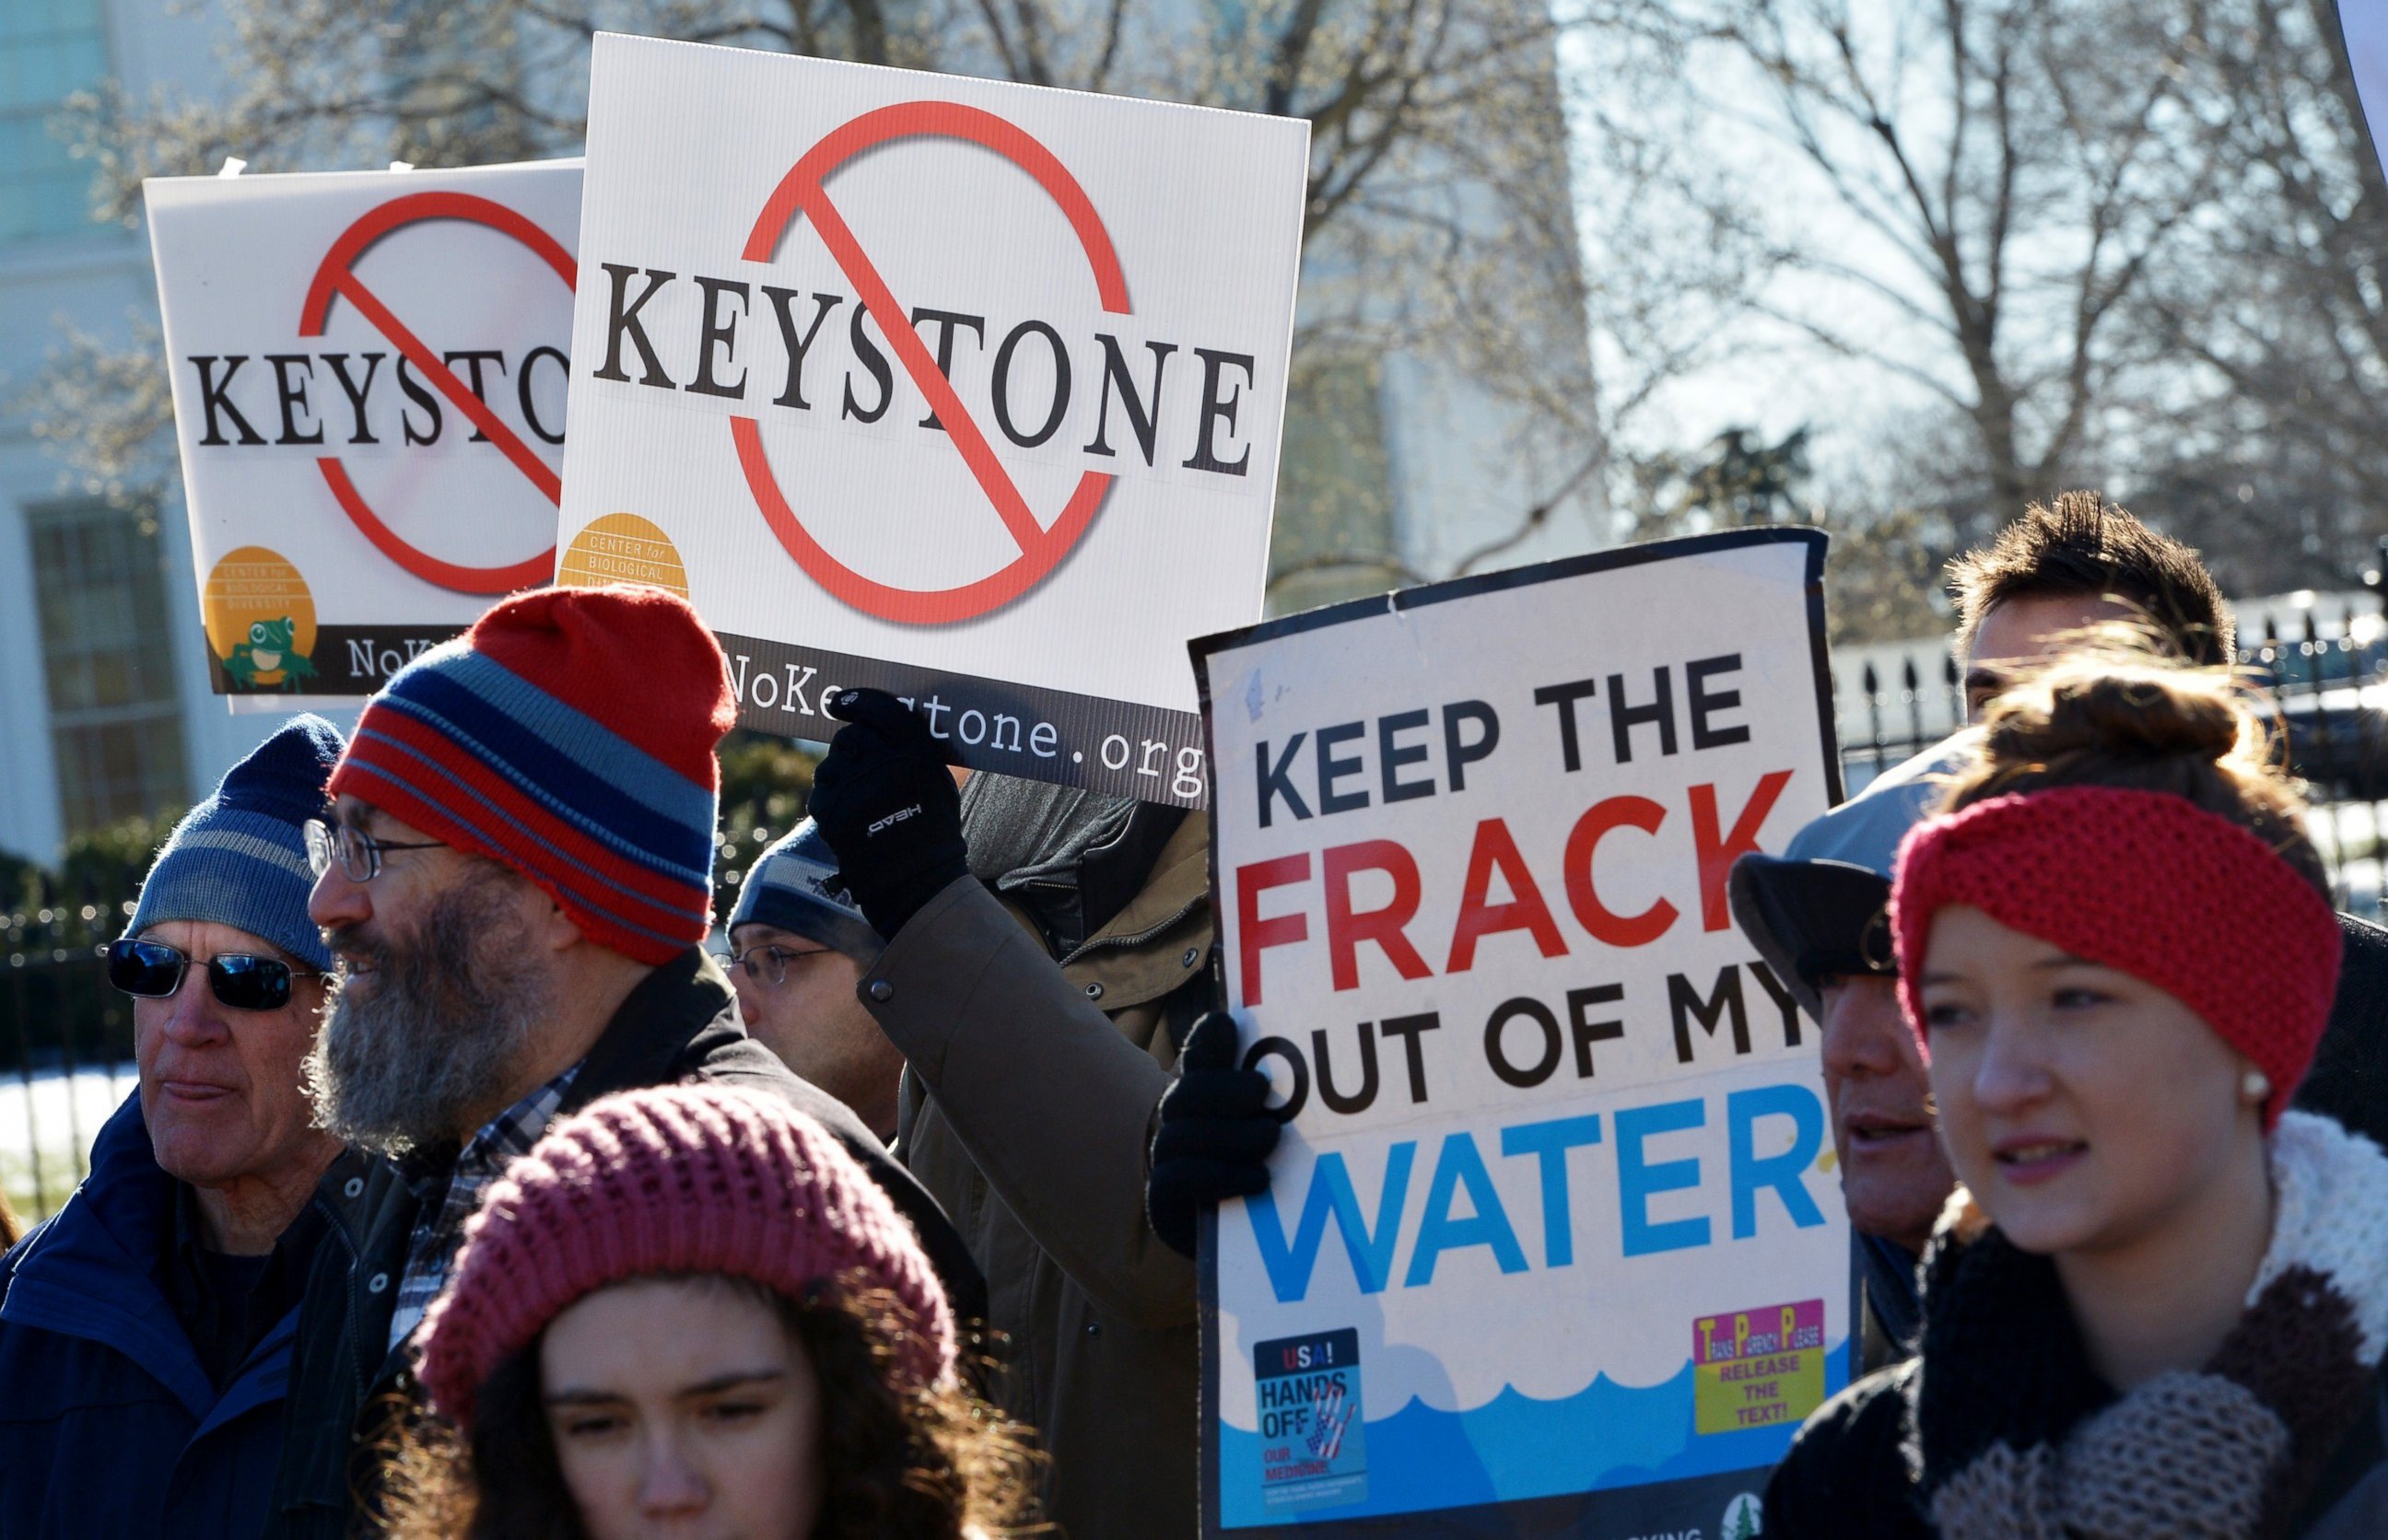 PHOTO: Demonstrators take part in a protest outside of the White House against the building of the proposed Keystone XL oil pipeline, Jan. 10, 2015, in Washington.